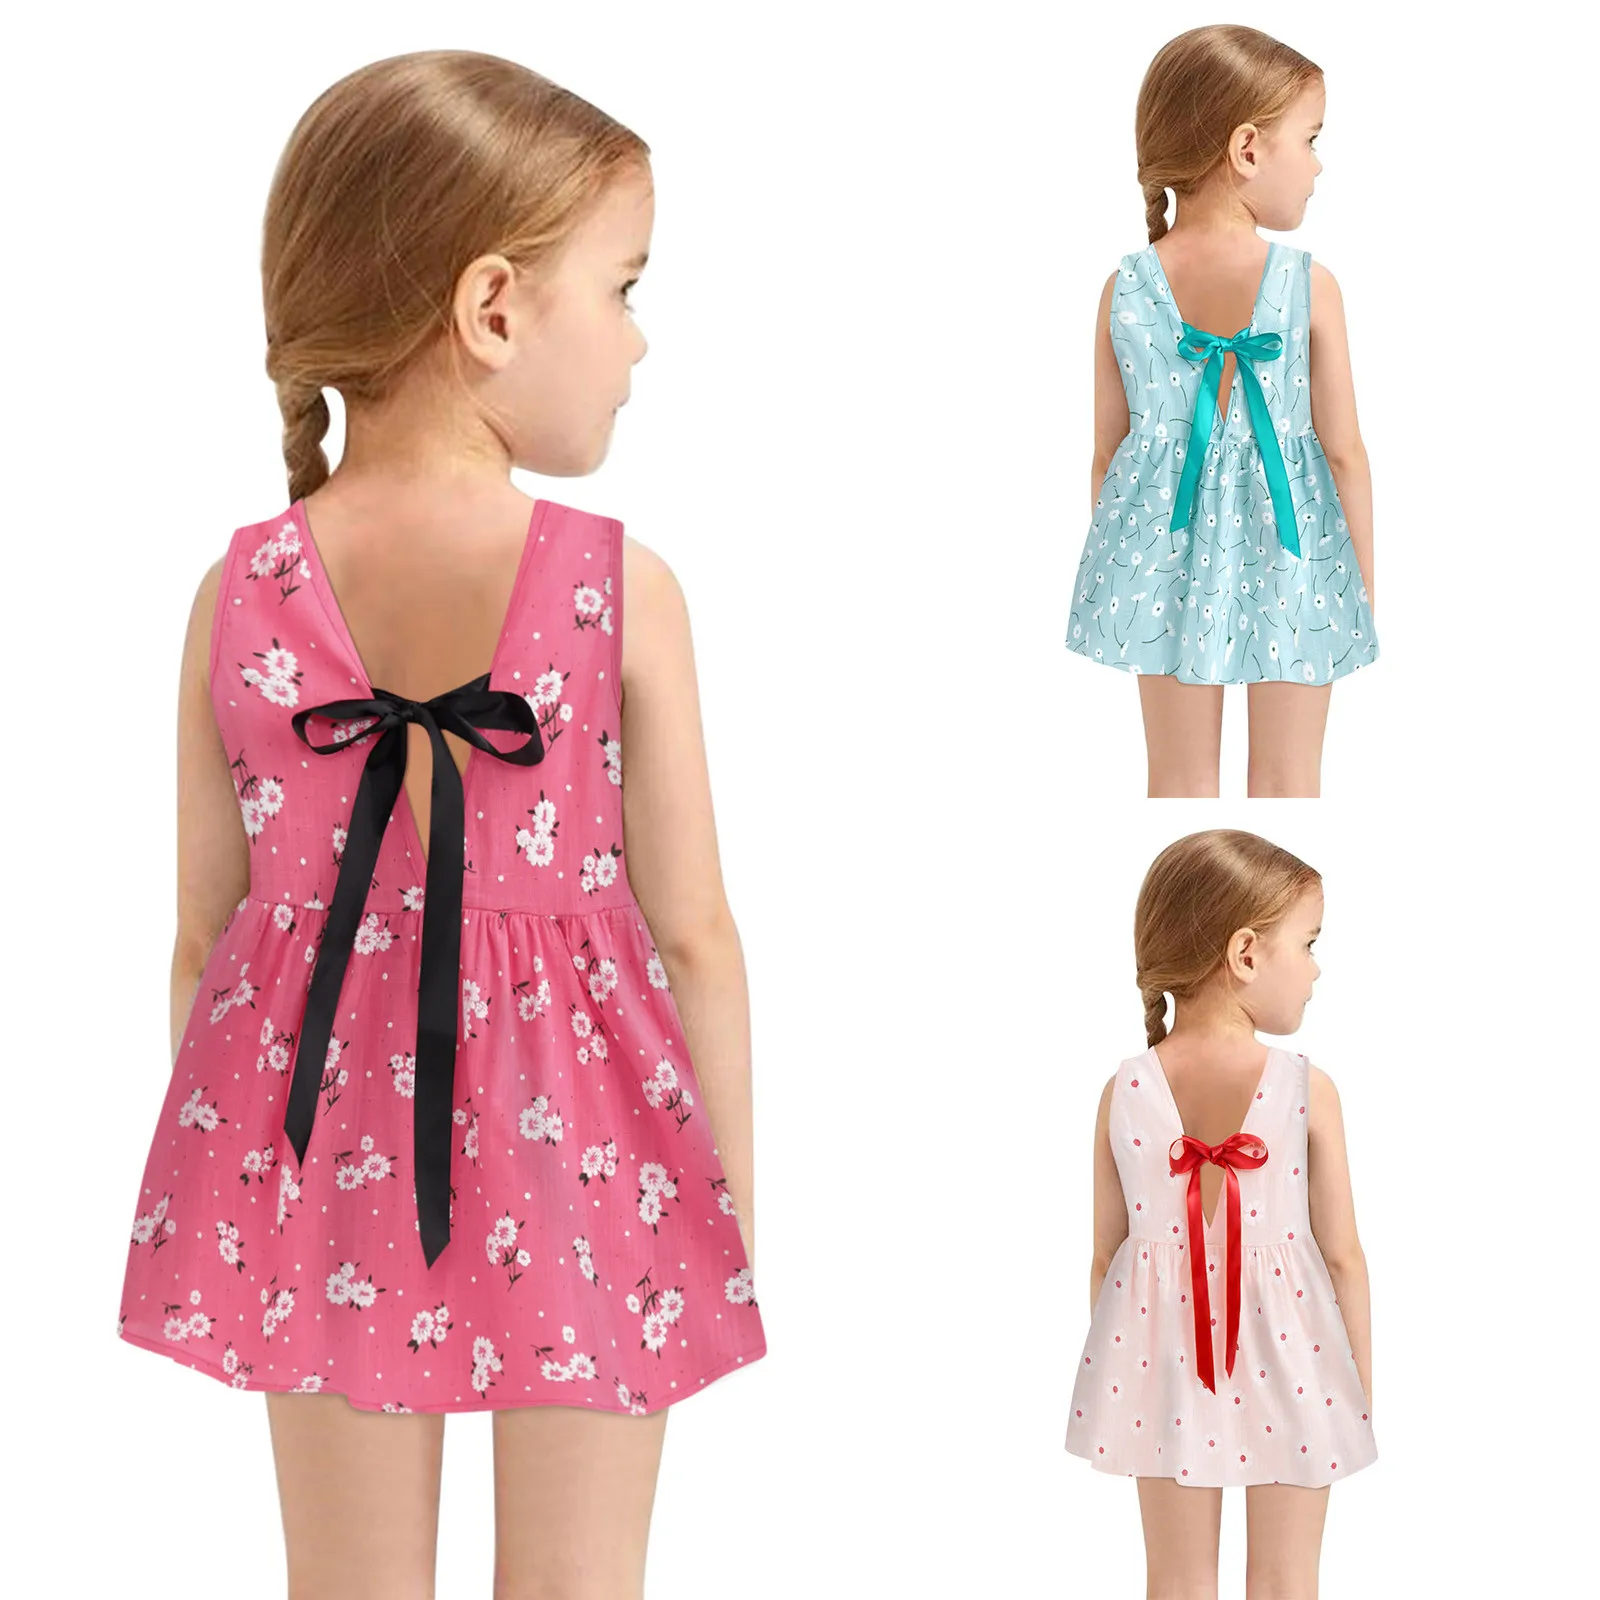 

2023 Summer Girls Clothes 6M-6Y Toddler Baby Kids Girls Dress Sleeveless Fashion Printed Backless Bowknot Princess Dress Clothes